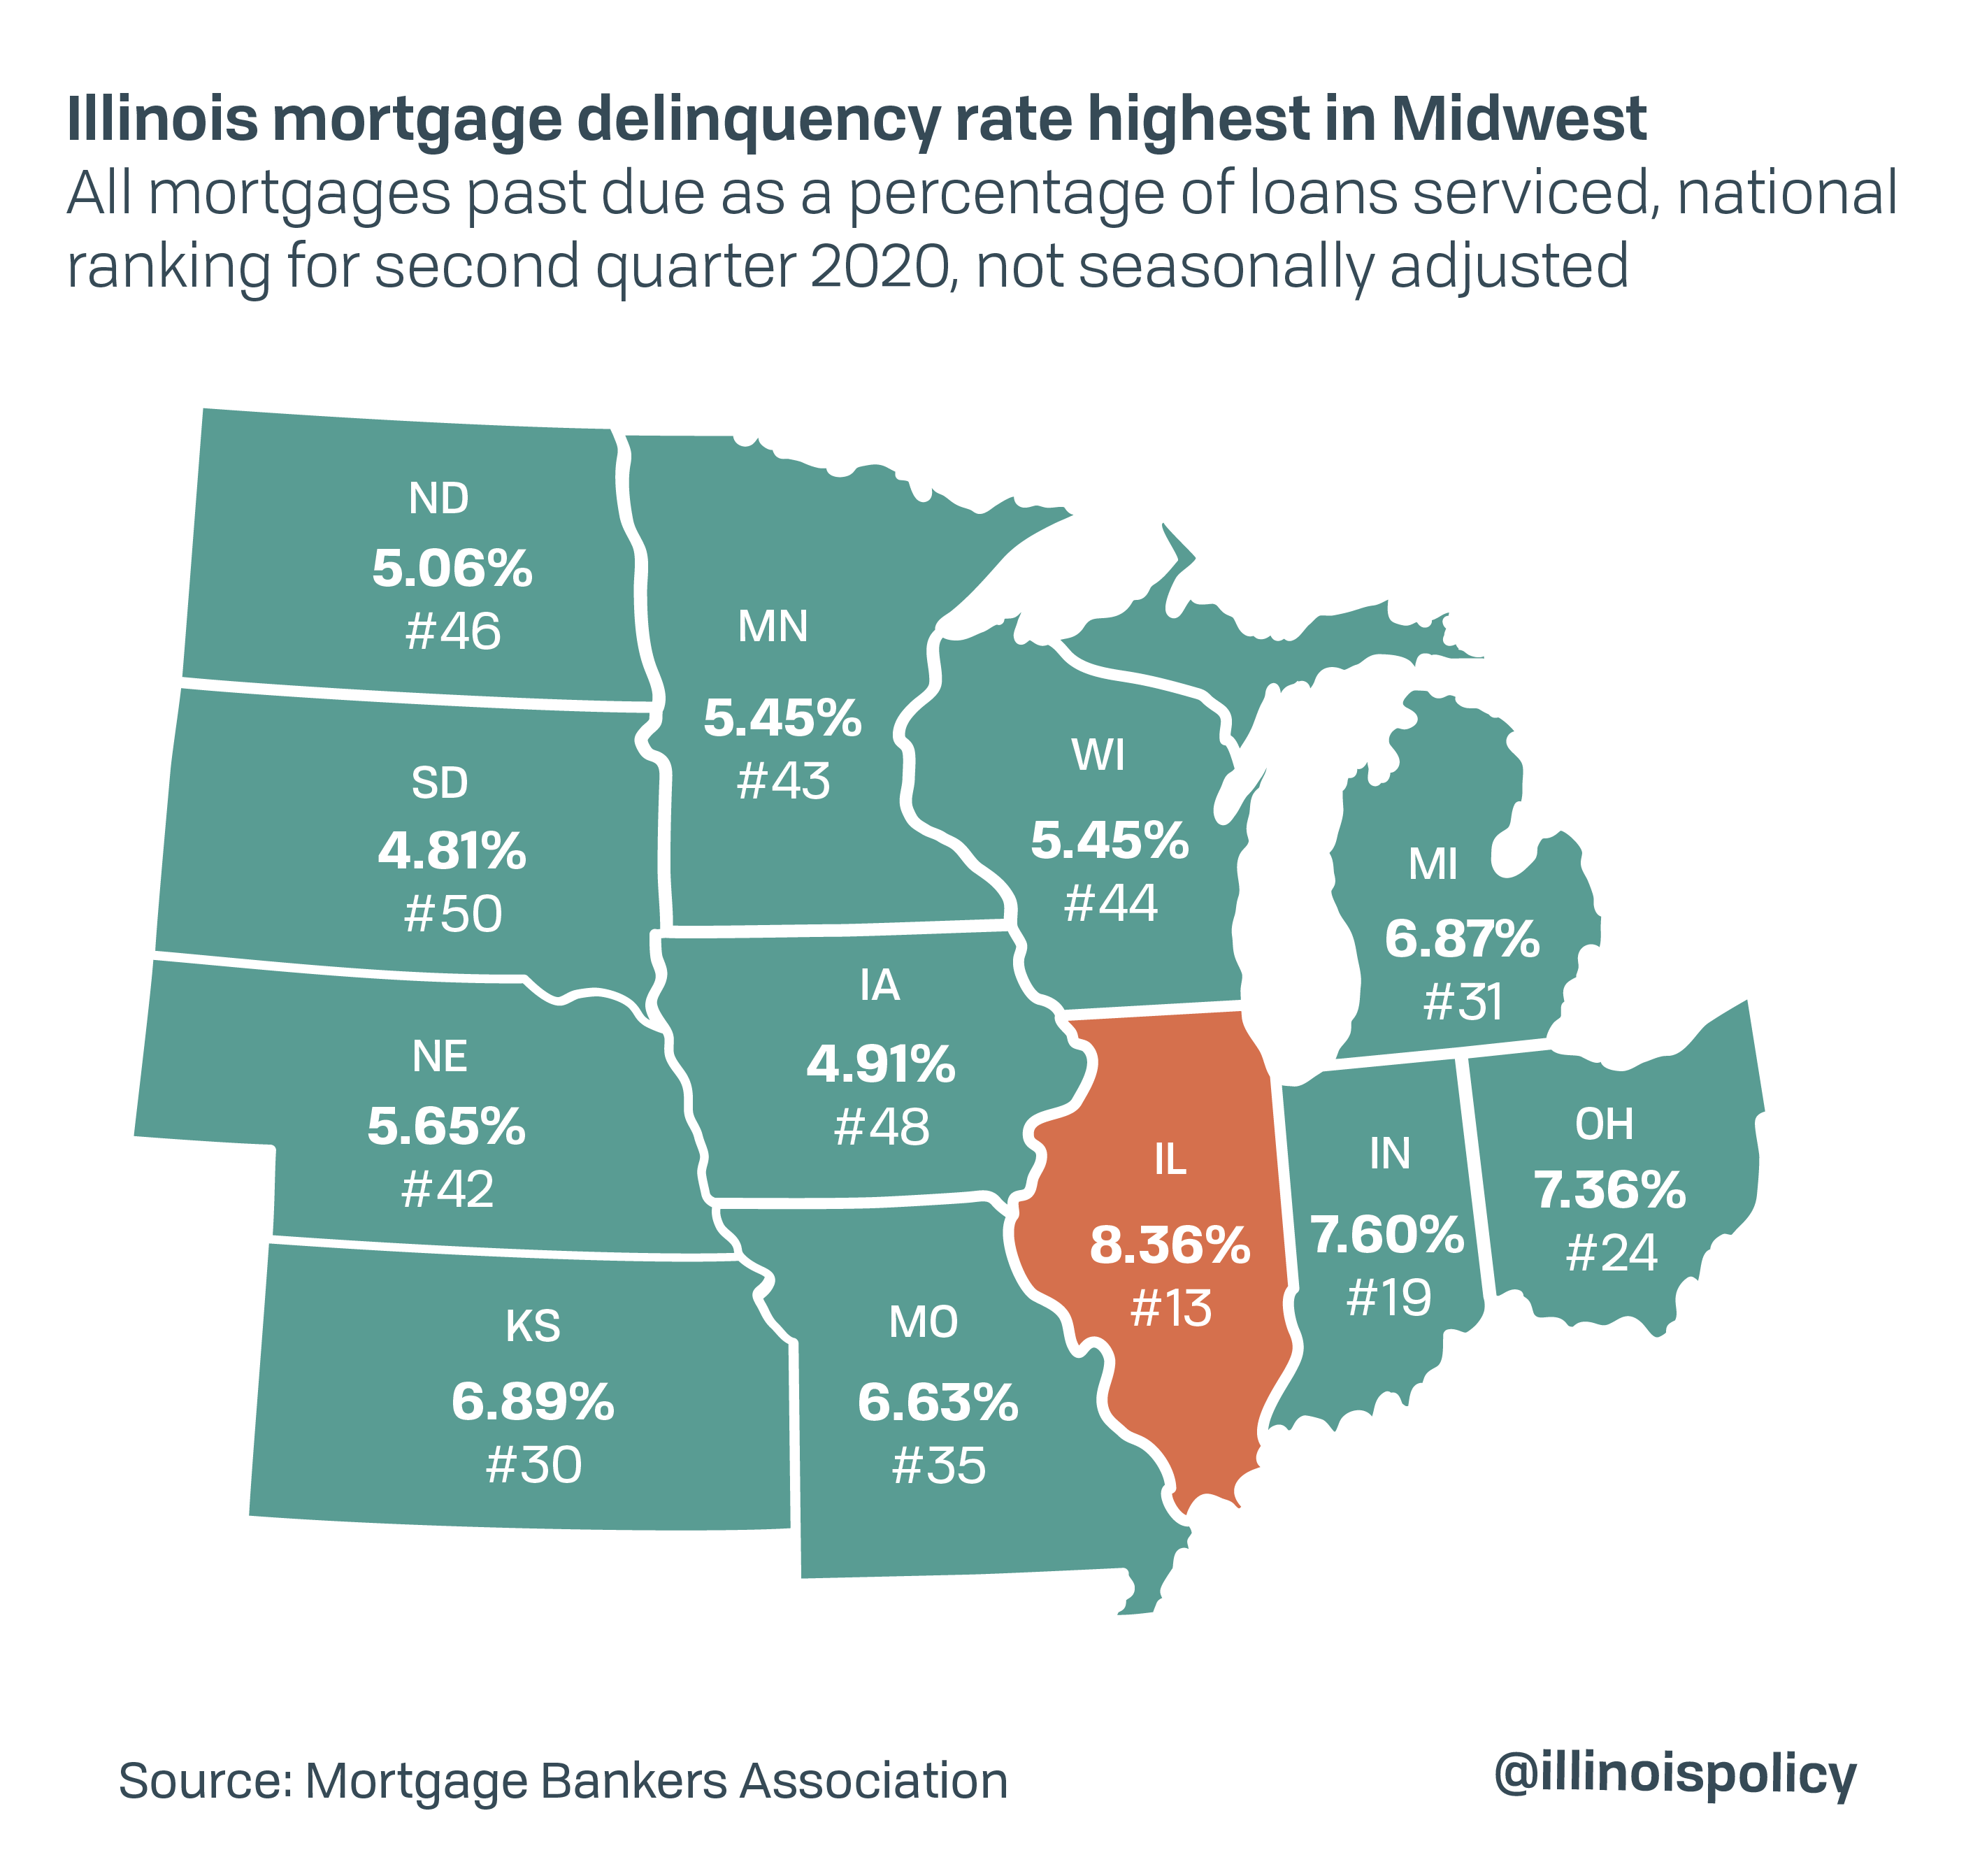 Illinois mortgage delinquency rate highest in Midwest